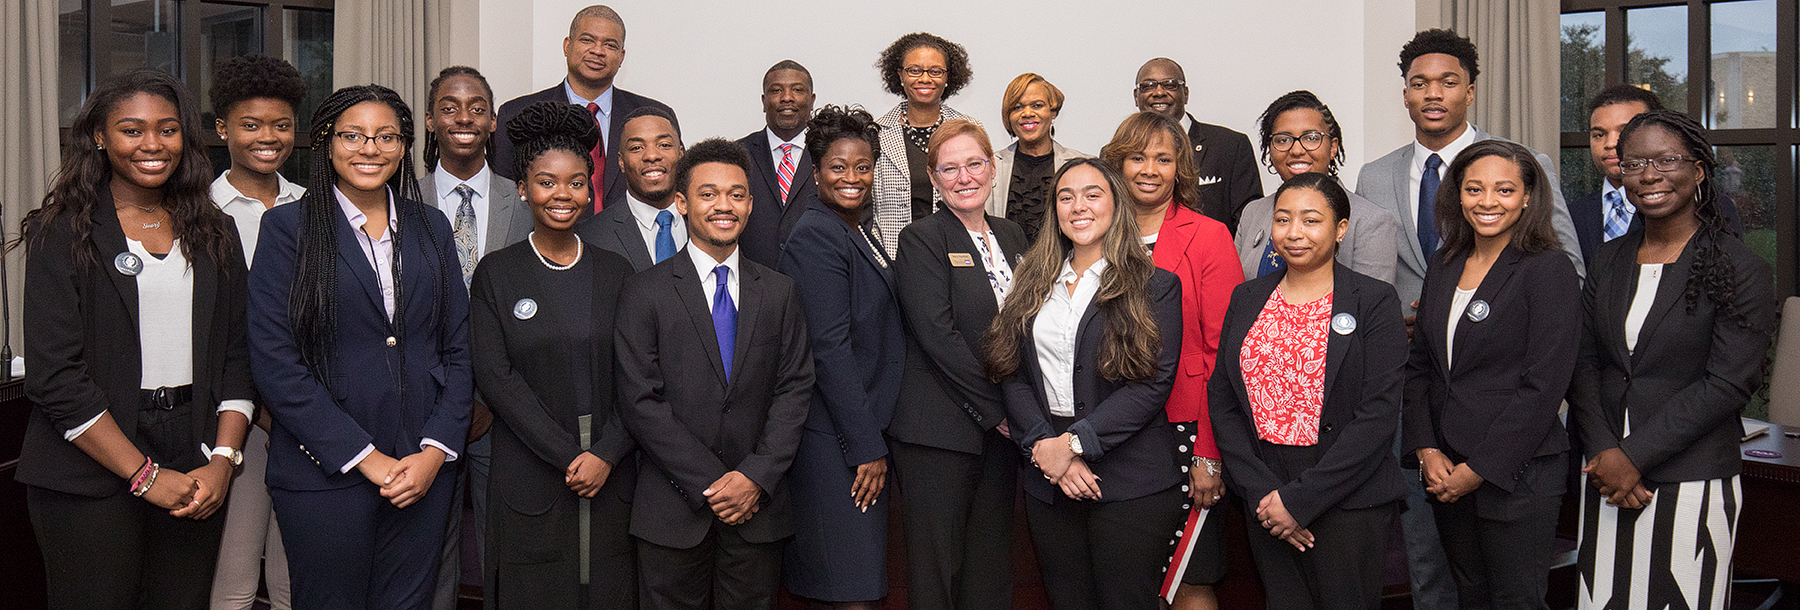 Section Image: Group of students and advisors in the National Association of Black Accountants 